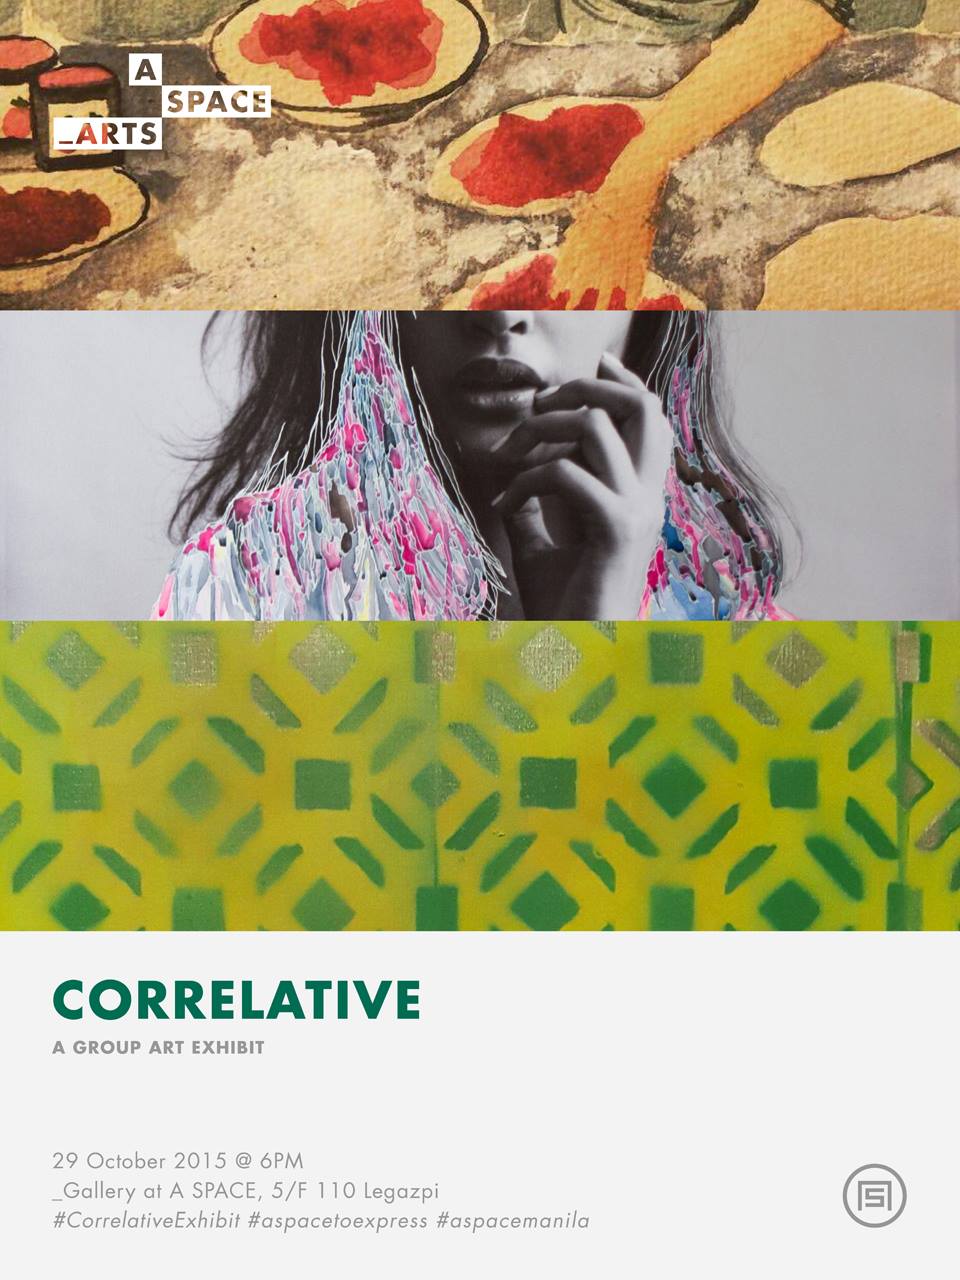 _ARTS: Correlative Thursday, October 29 at 6:00pm 2 days from now · 90°F / 74°F Partly Cloudy Show Map A Space - Philippines 110 Legazpi Street, 1229 Makati, Philippines Correlative is a collection of Artworks by Kristine Armada,Michi Pichel, and Joana Ilejay in collab with Kevin Brent Sanderson. Despite the differences in inspiration and story of their art. These artists showcased the interesting mix of watercolor with other mediums. Colors and their fascination of people is what brought them together to showcase a colorful and inspiring Exhibit. Join us on October 29, 6pm for the Opening Night at A SPACE _GALLERY.